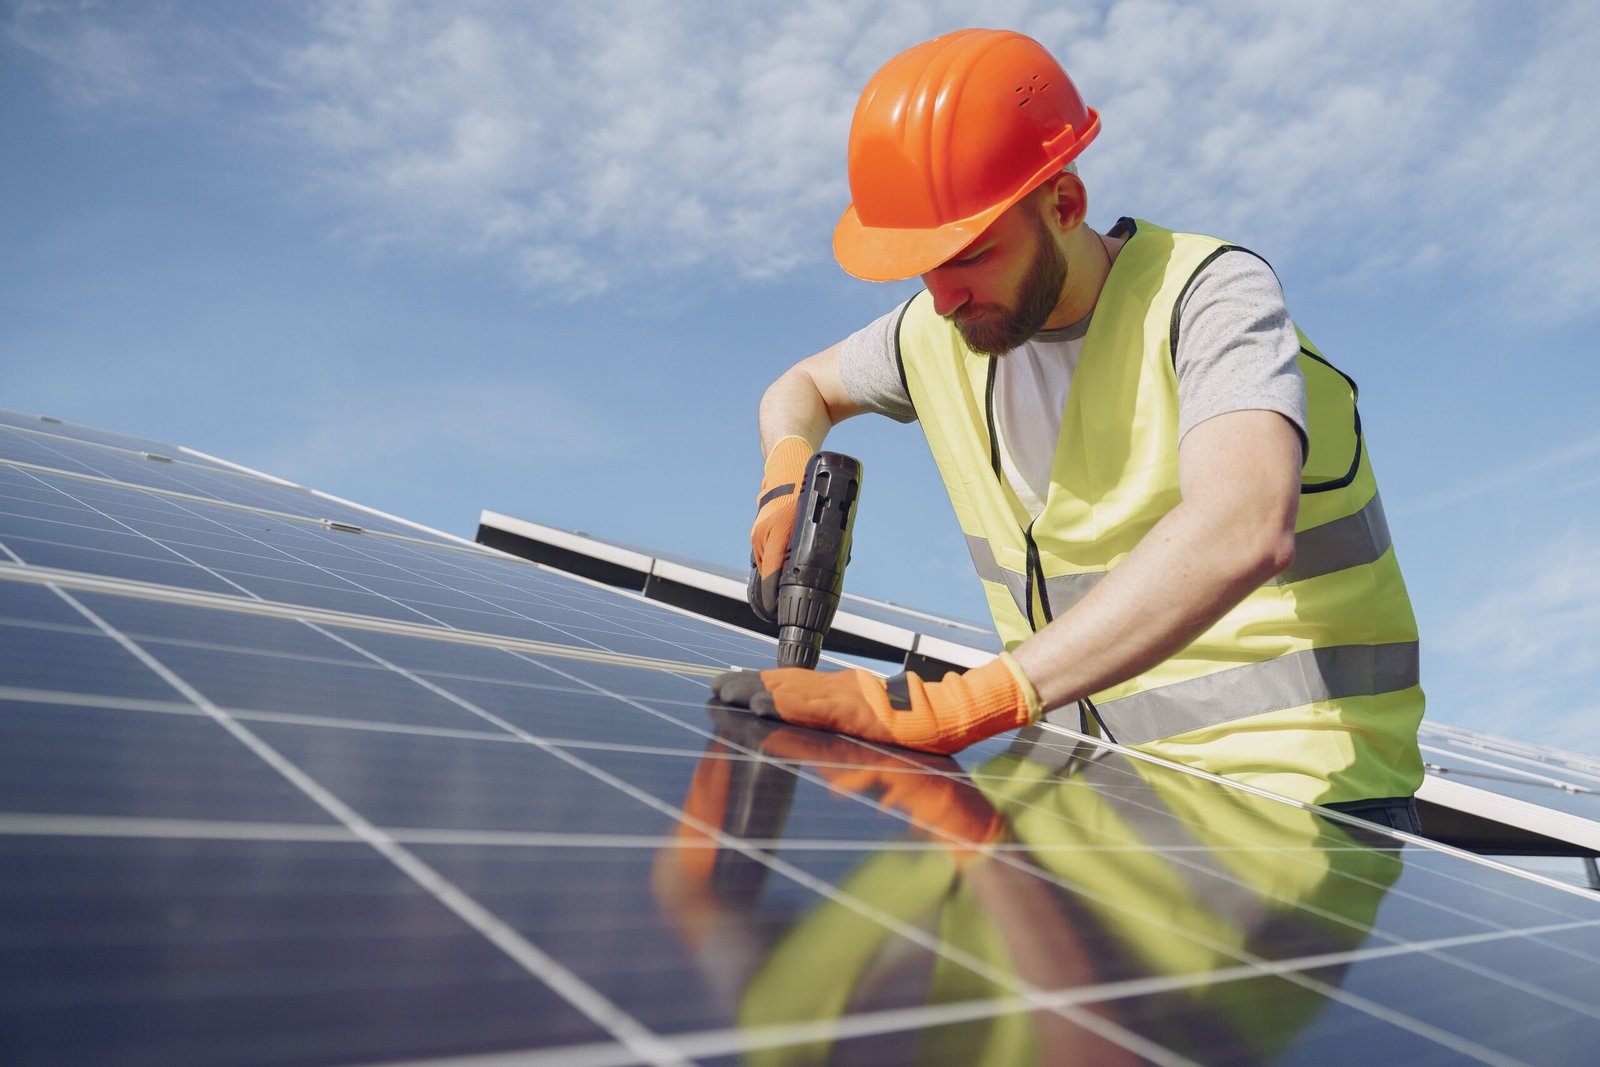 Need Solar Panel Repair & Services in India? Where can you find Reliable Help?